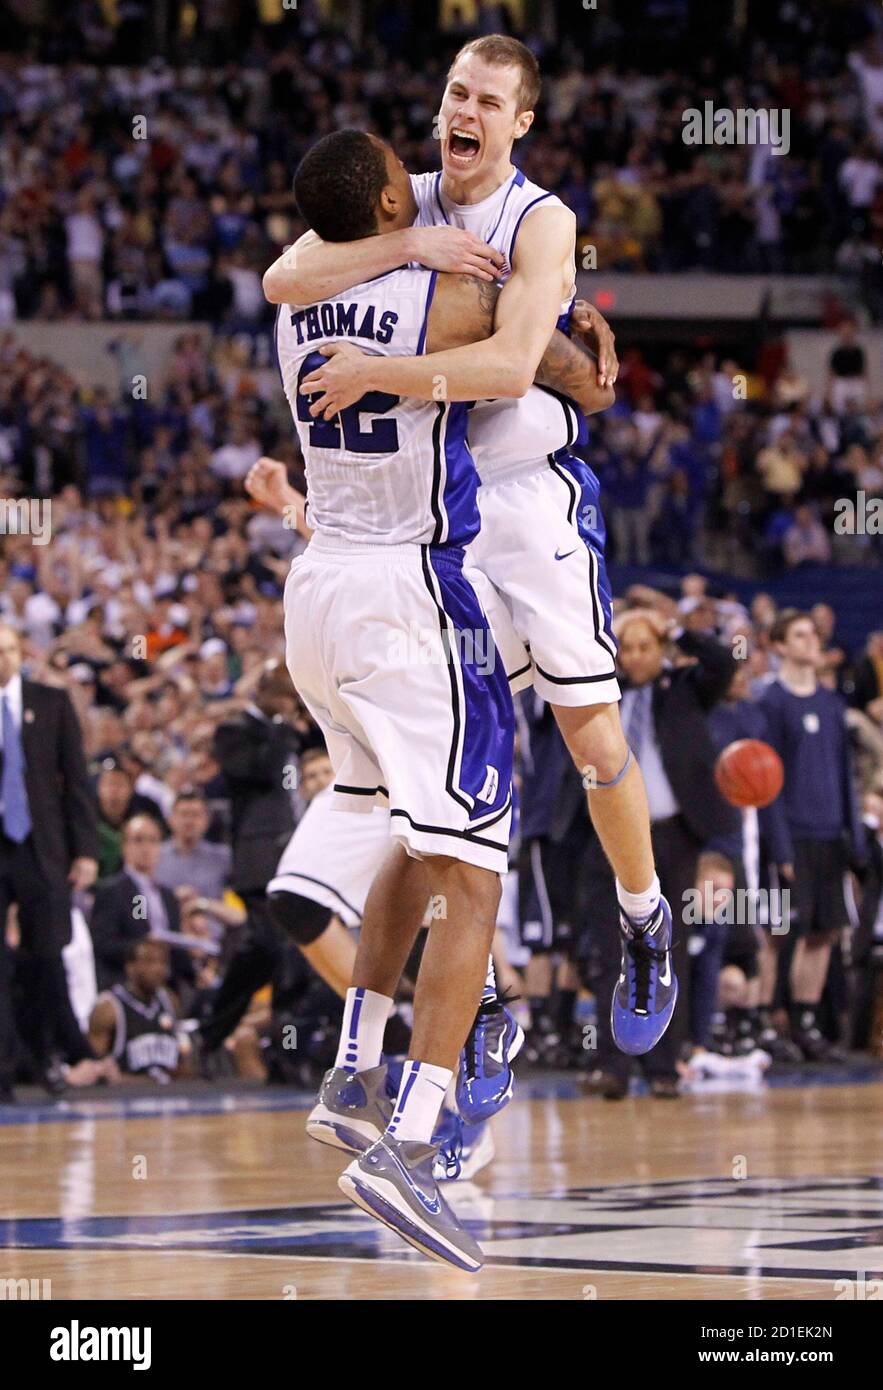 Duke's Jon Scheyer (R) and Lance Thomas celebrate their victory against Butler their NCAA national championship college basketball game in Indianapolis, Indiana, April 5, 2010.     REUTERS/Mark Blinch (UNITED STATES - Tags: SPORT BASKETBALL IMAGES OF THE DAY) Stock Photo